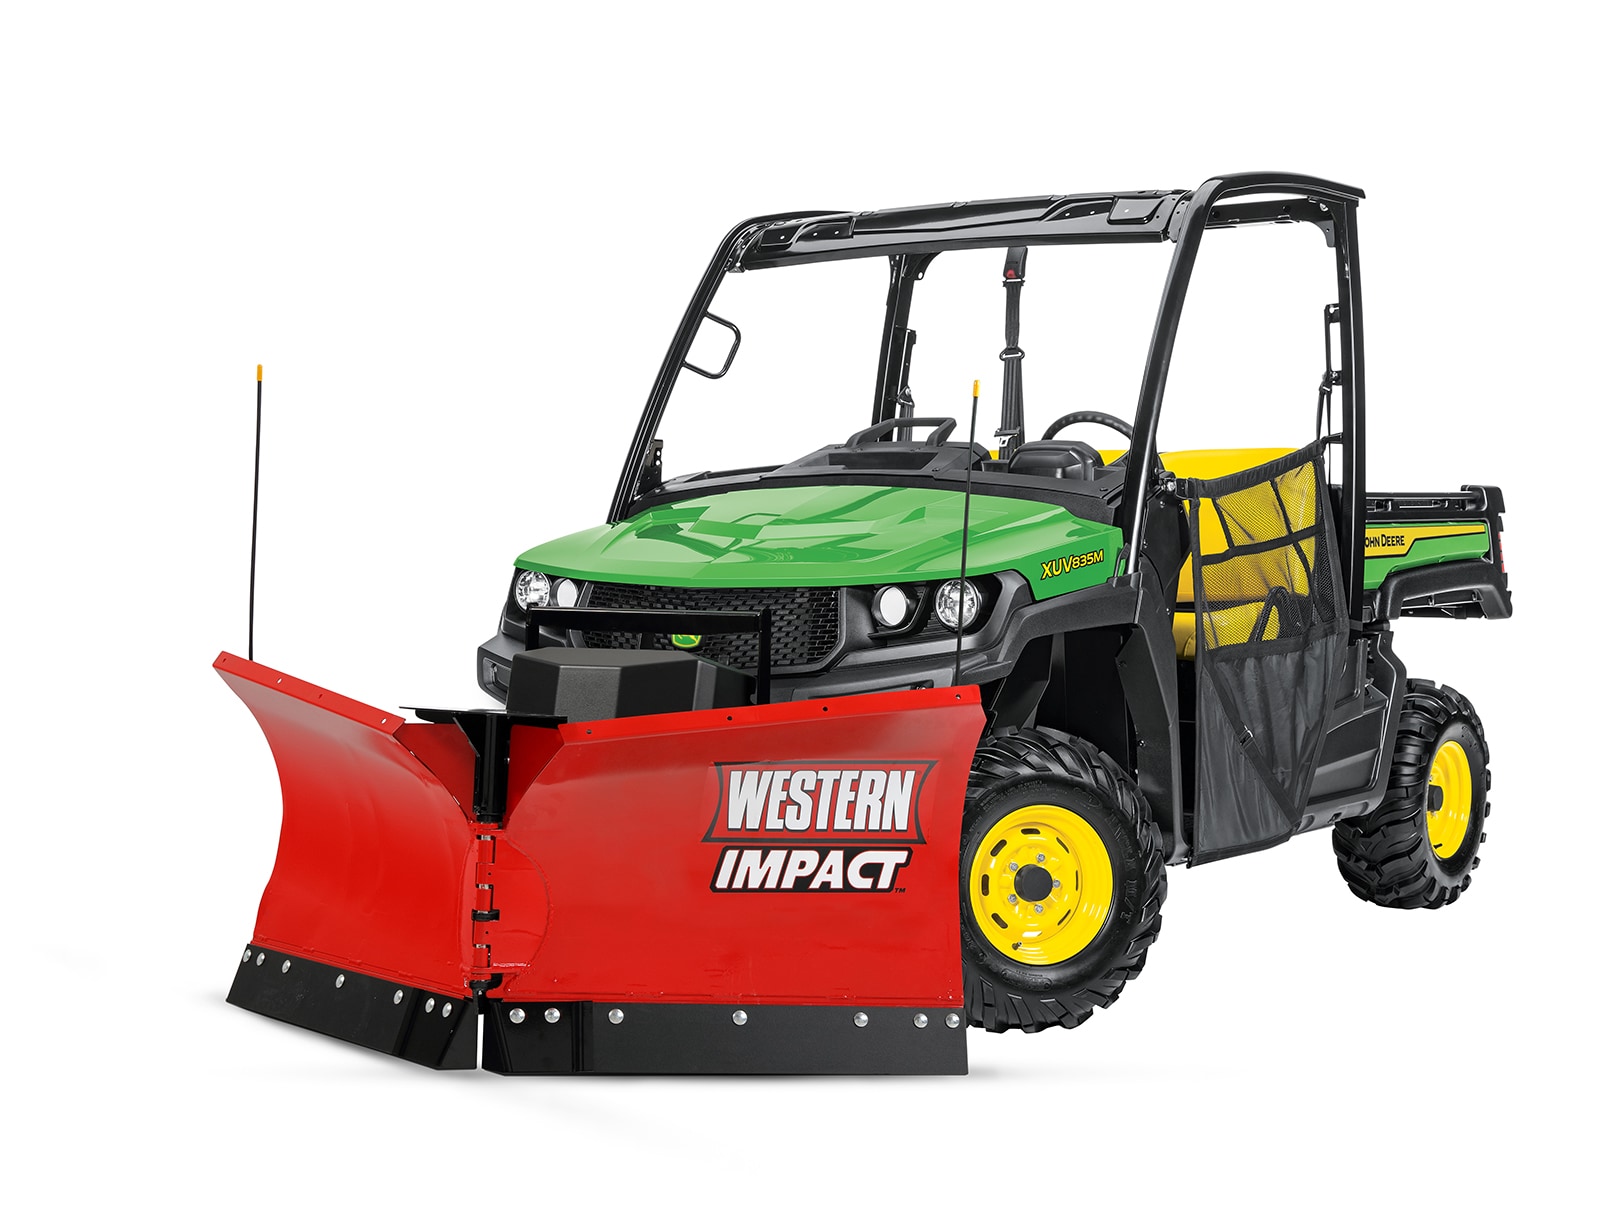 John Deere dealers will sell WESTERN<sup>®</sup> snow and ice removal products